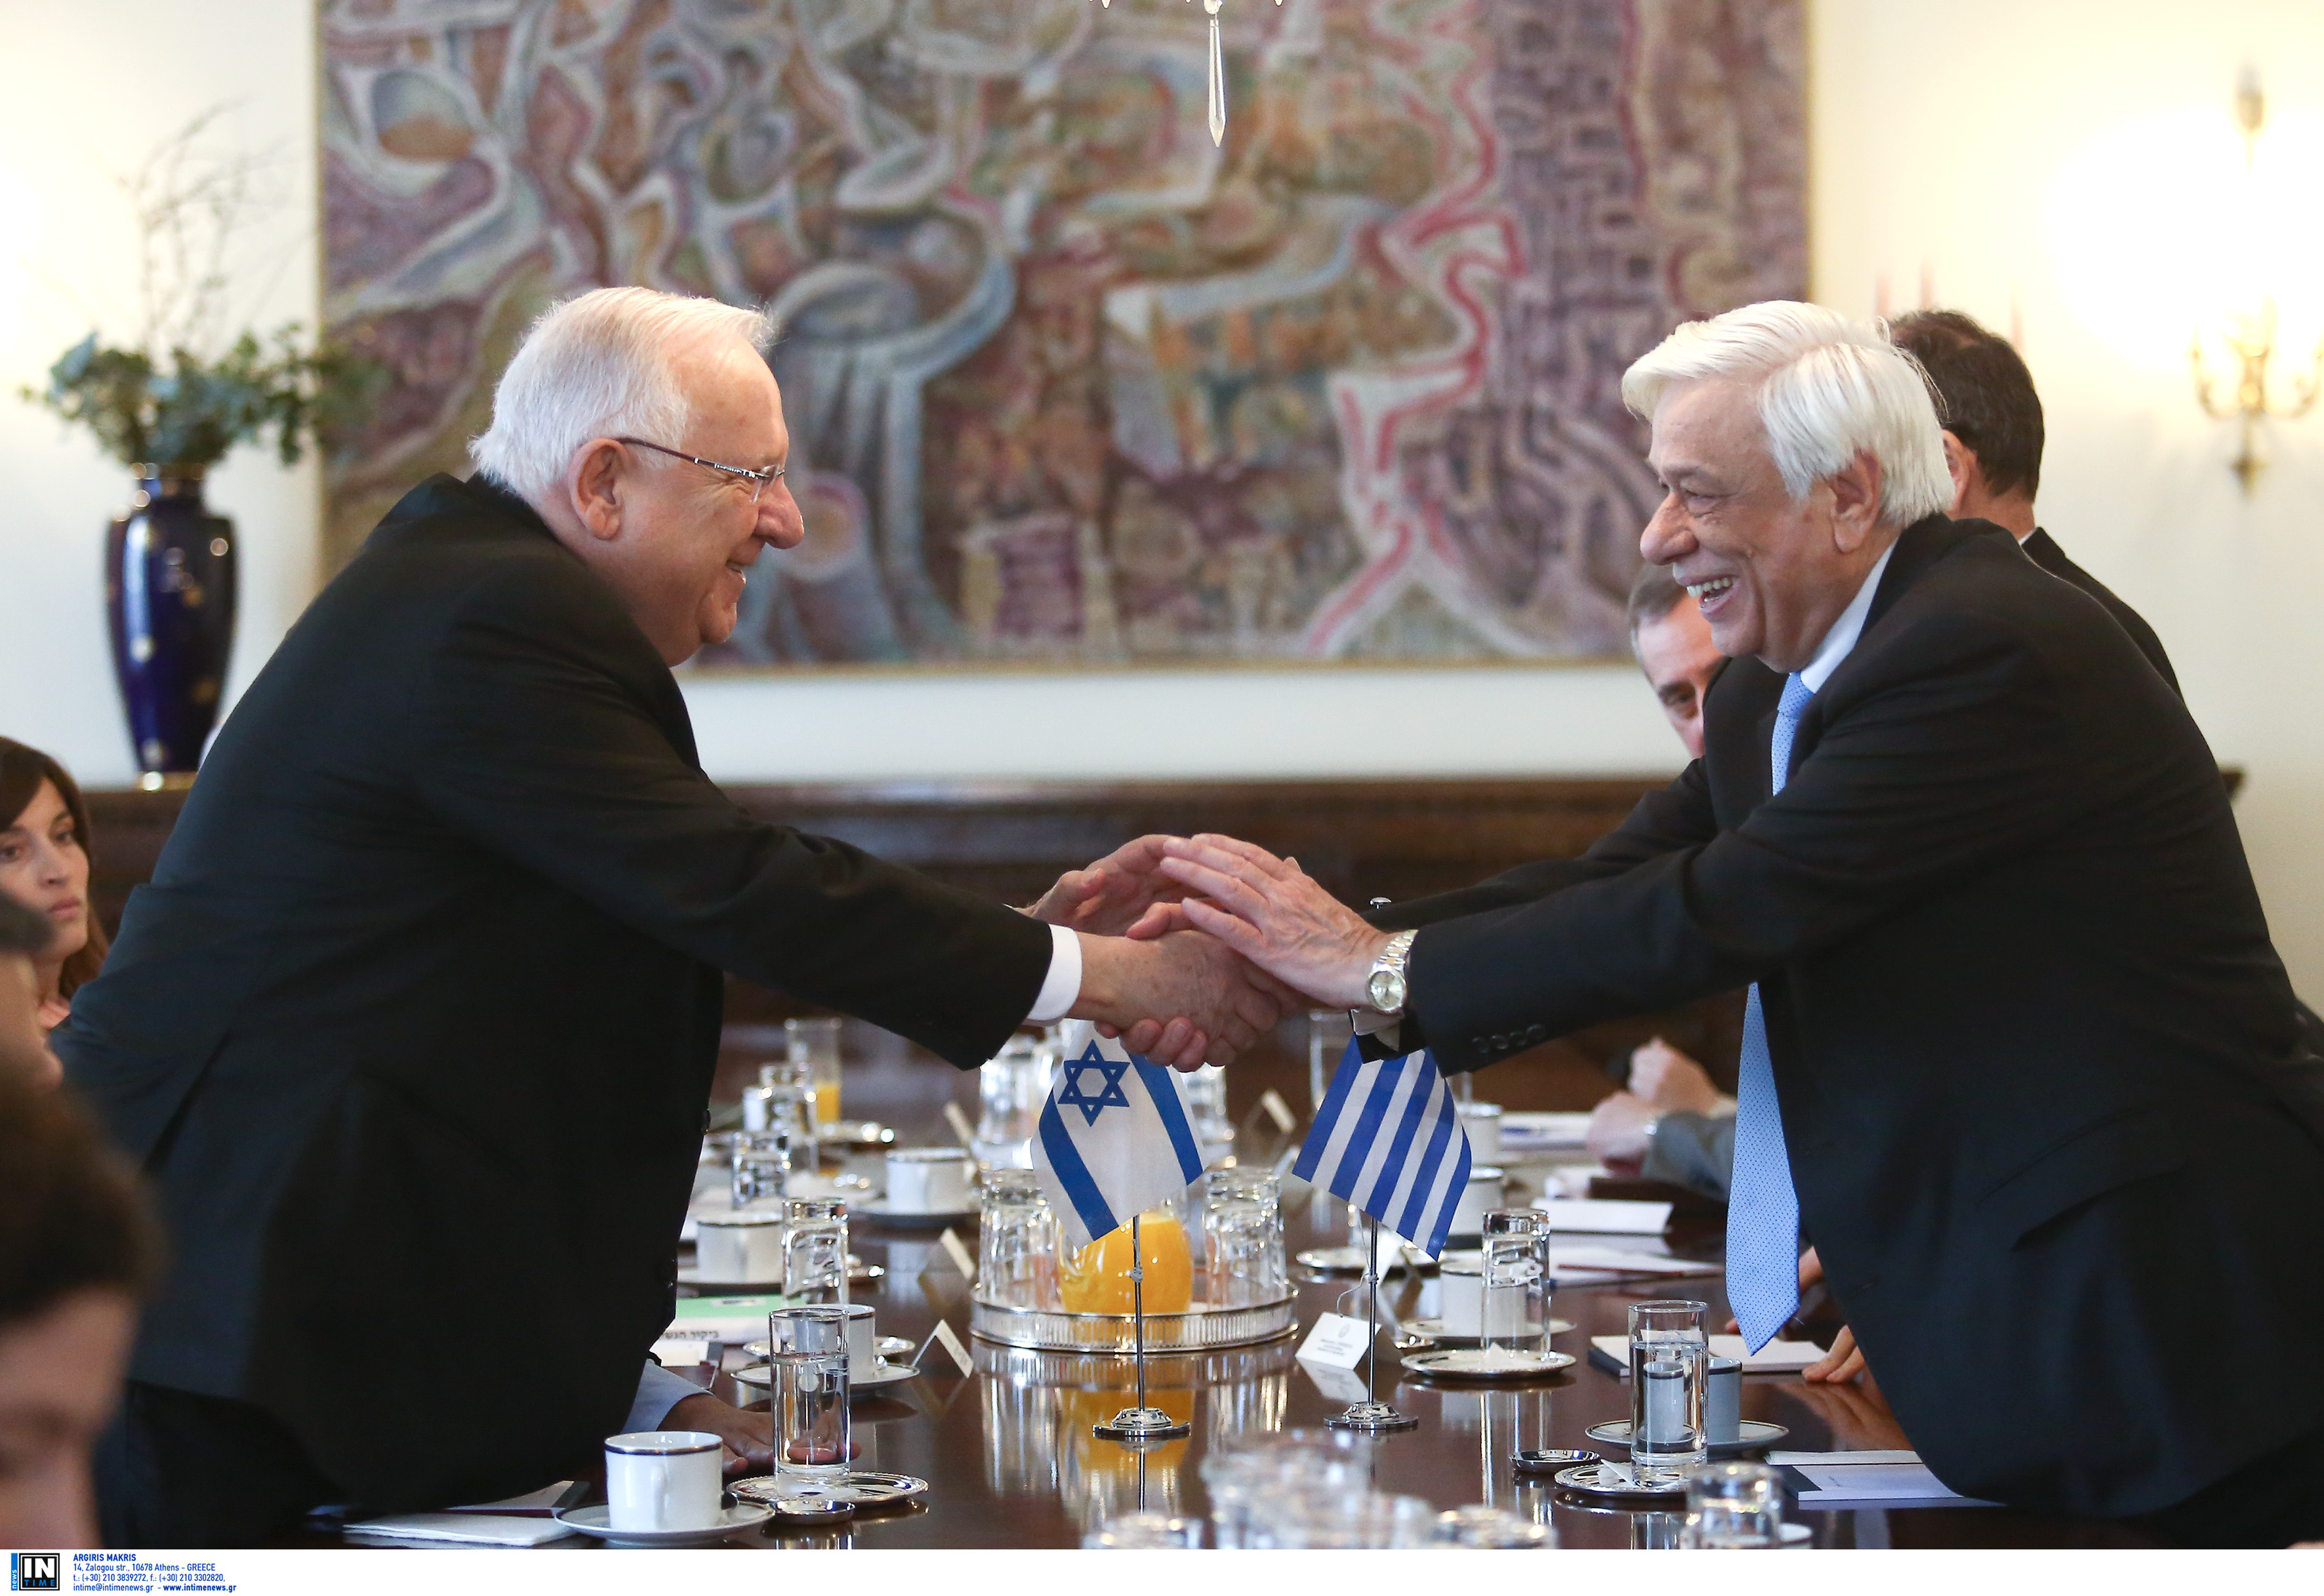 Pavlopoulos asks visiting Israeli President for support on Greek national issues